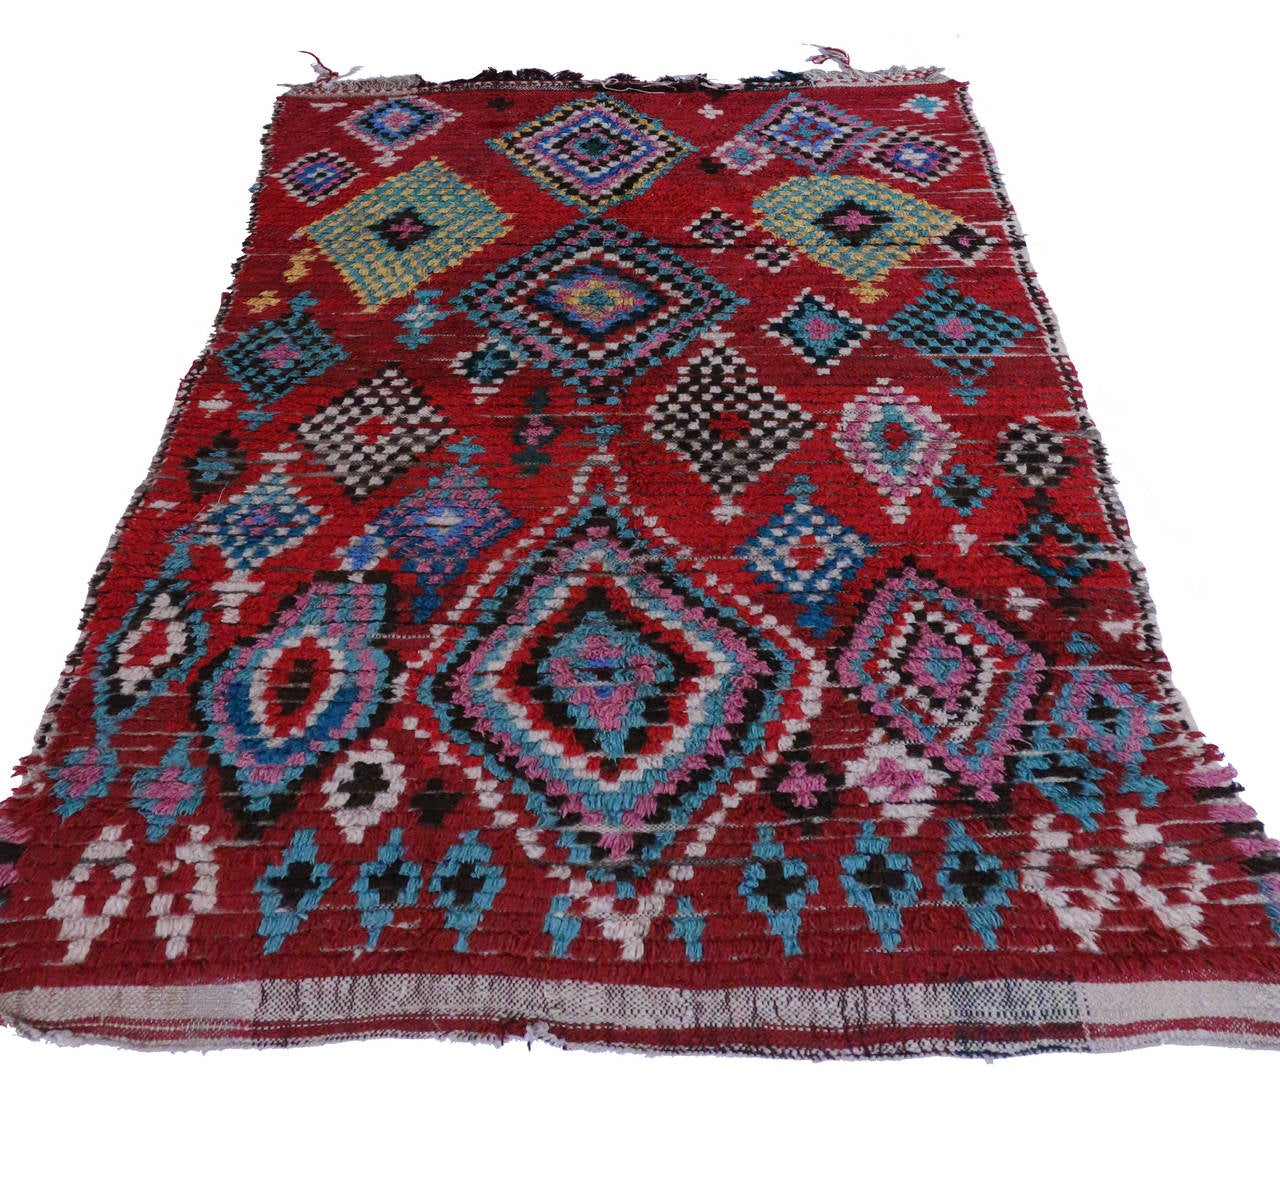 Berber Moroccan Rug with Modern Tribal Design and Boho Chic Style 2